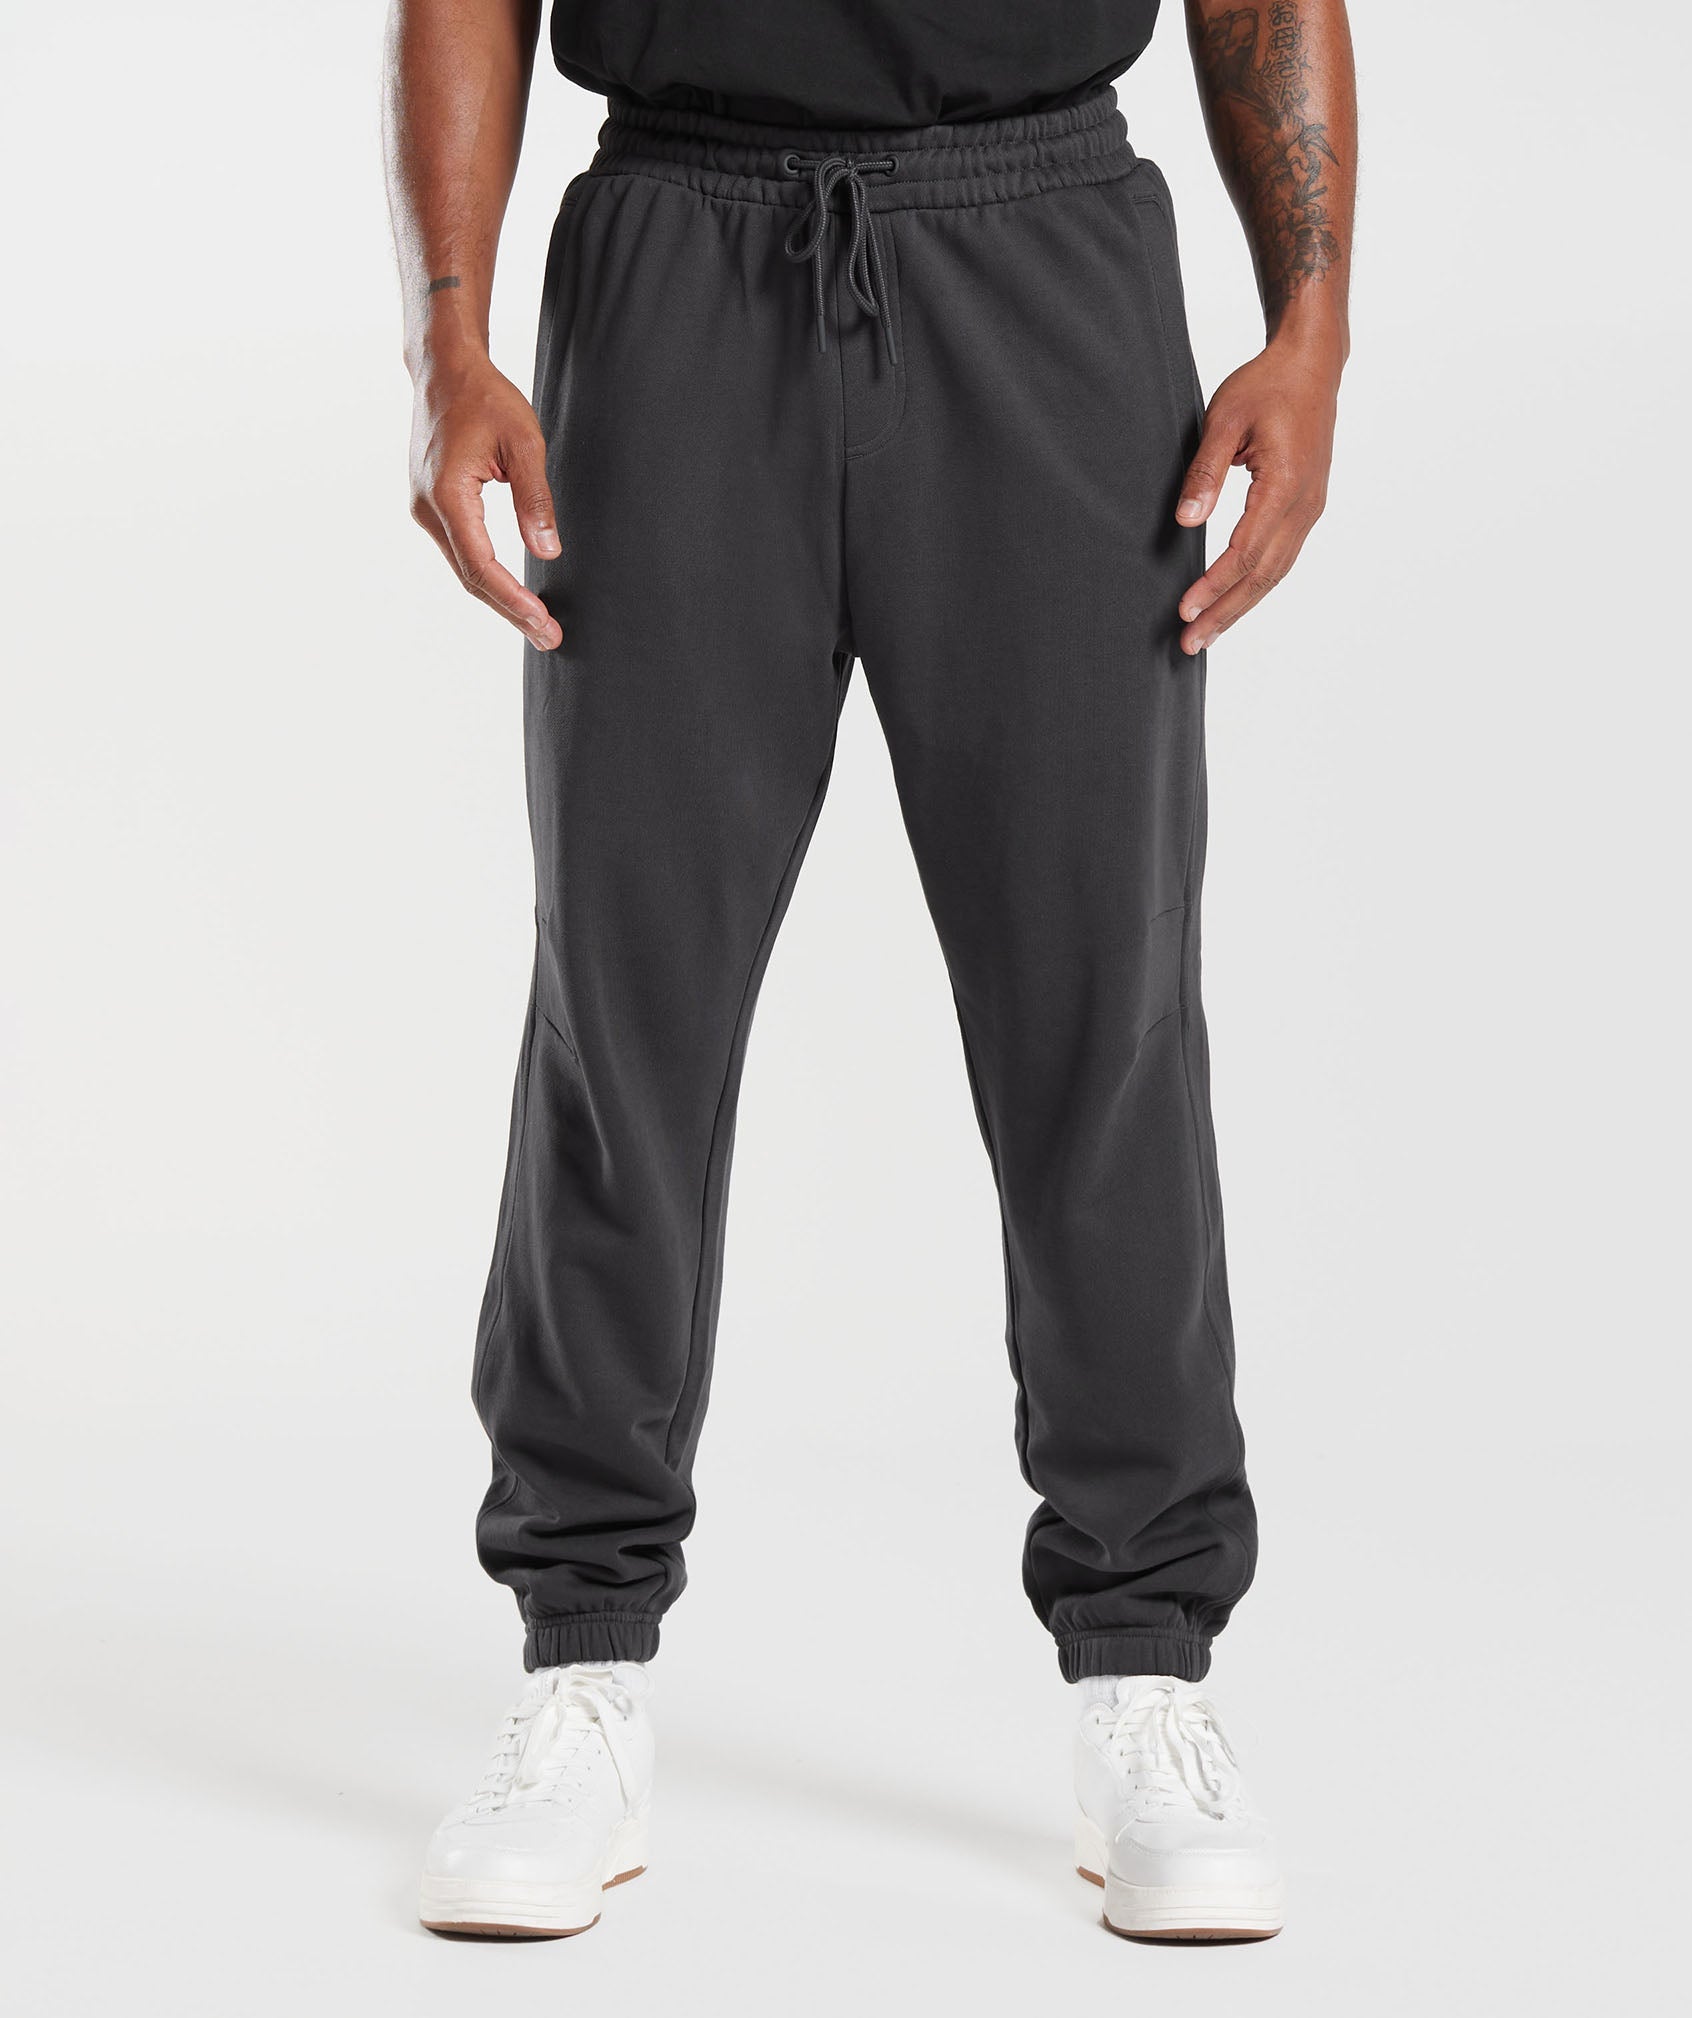 Rest Day Essentials Joggers in Onyx Grey